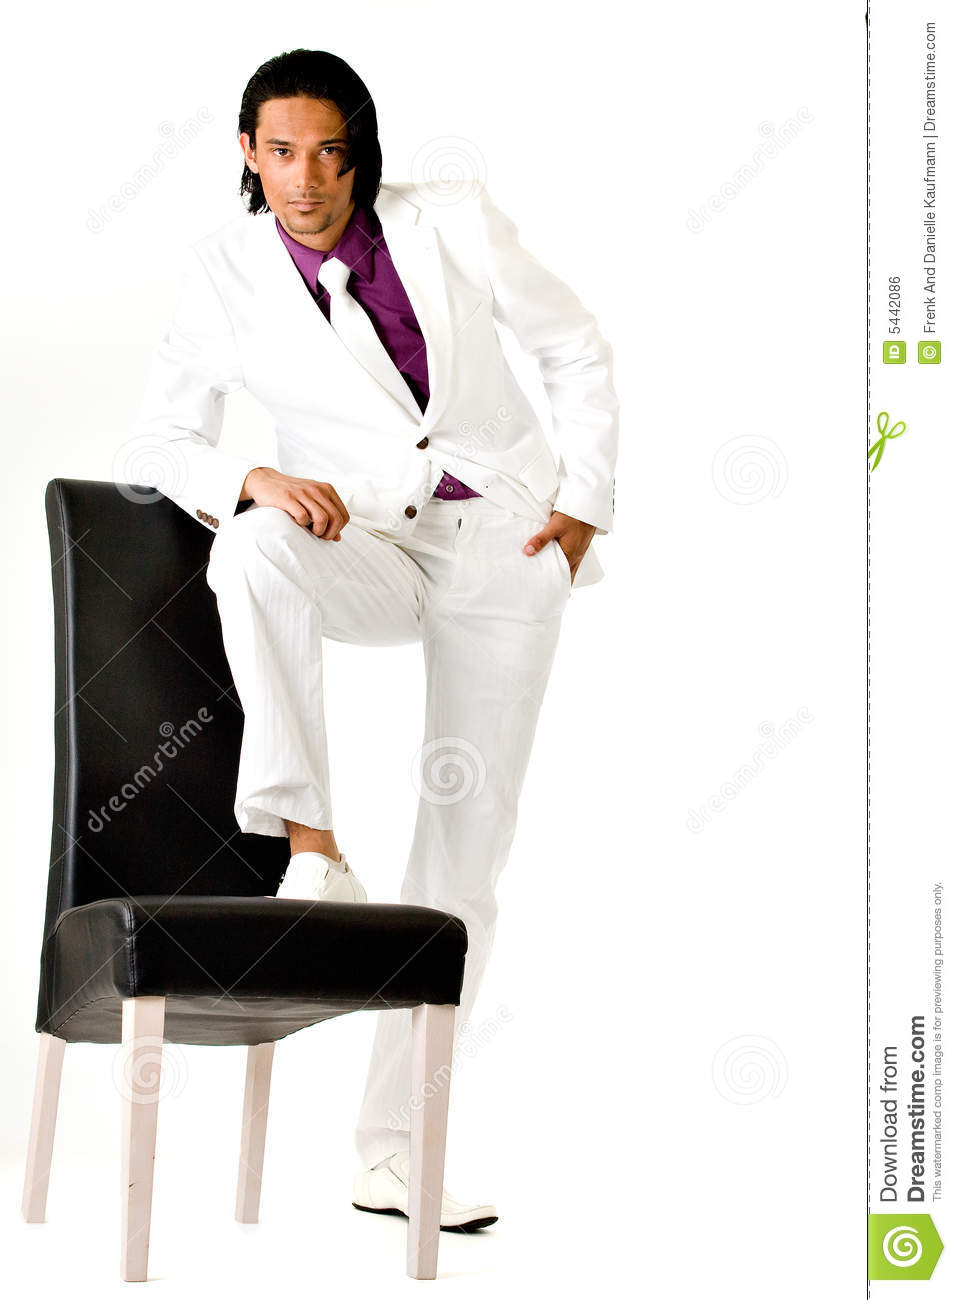 Indonesian Man In A Busniess Suit Royalty Free Stock Image   Image